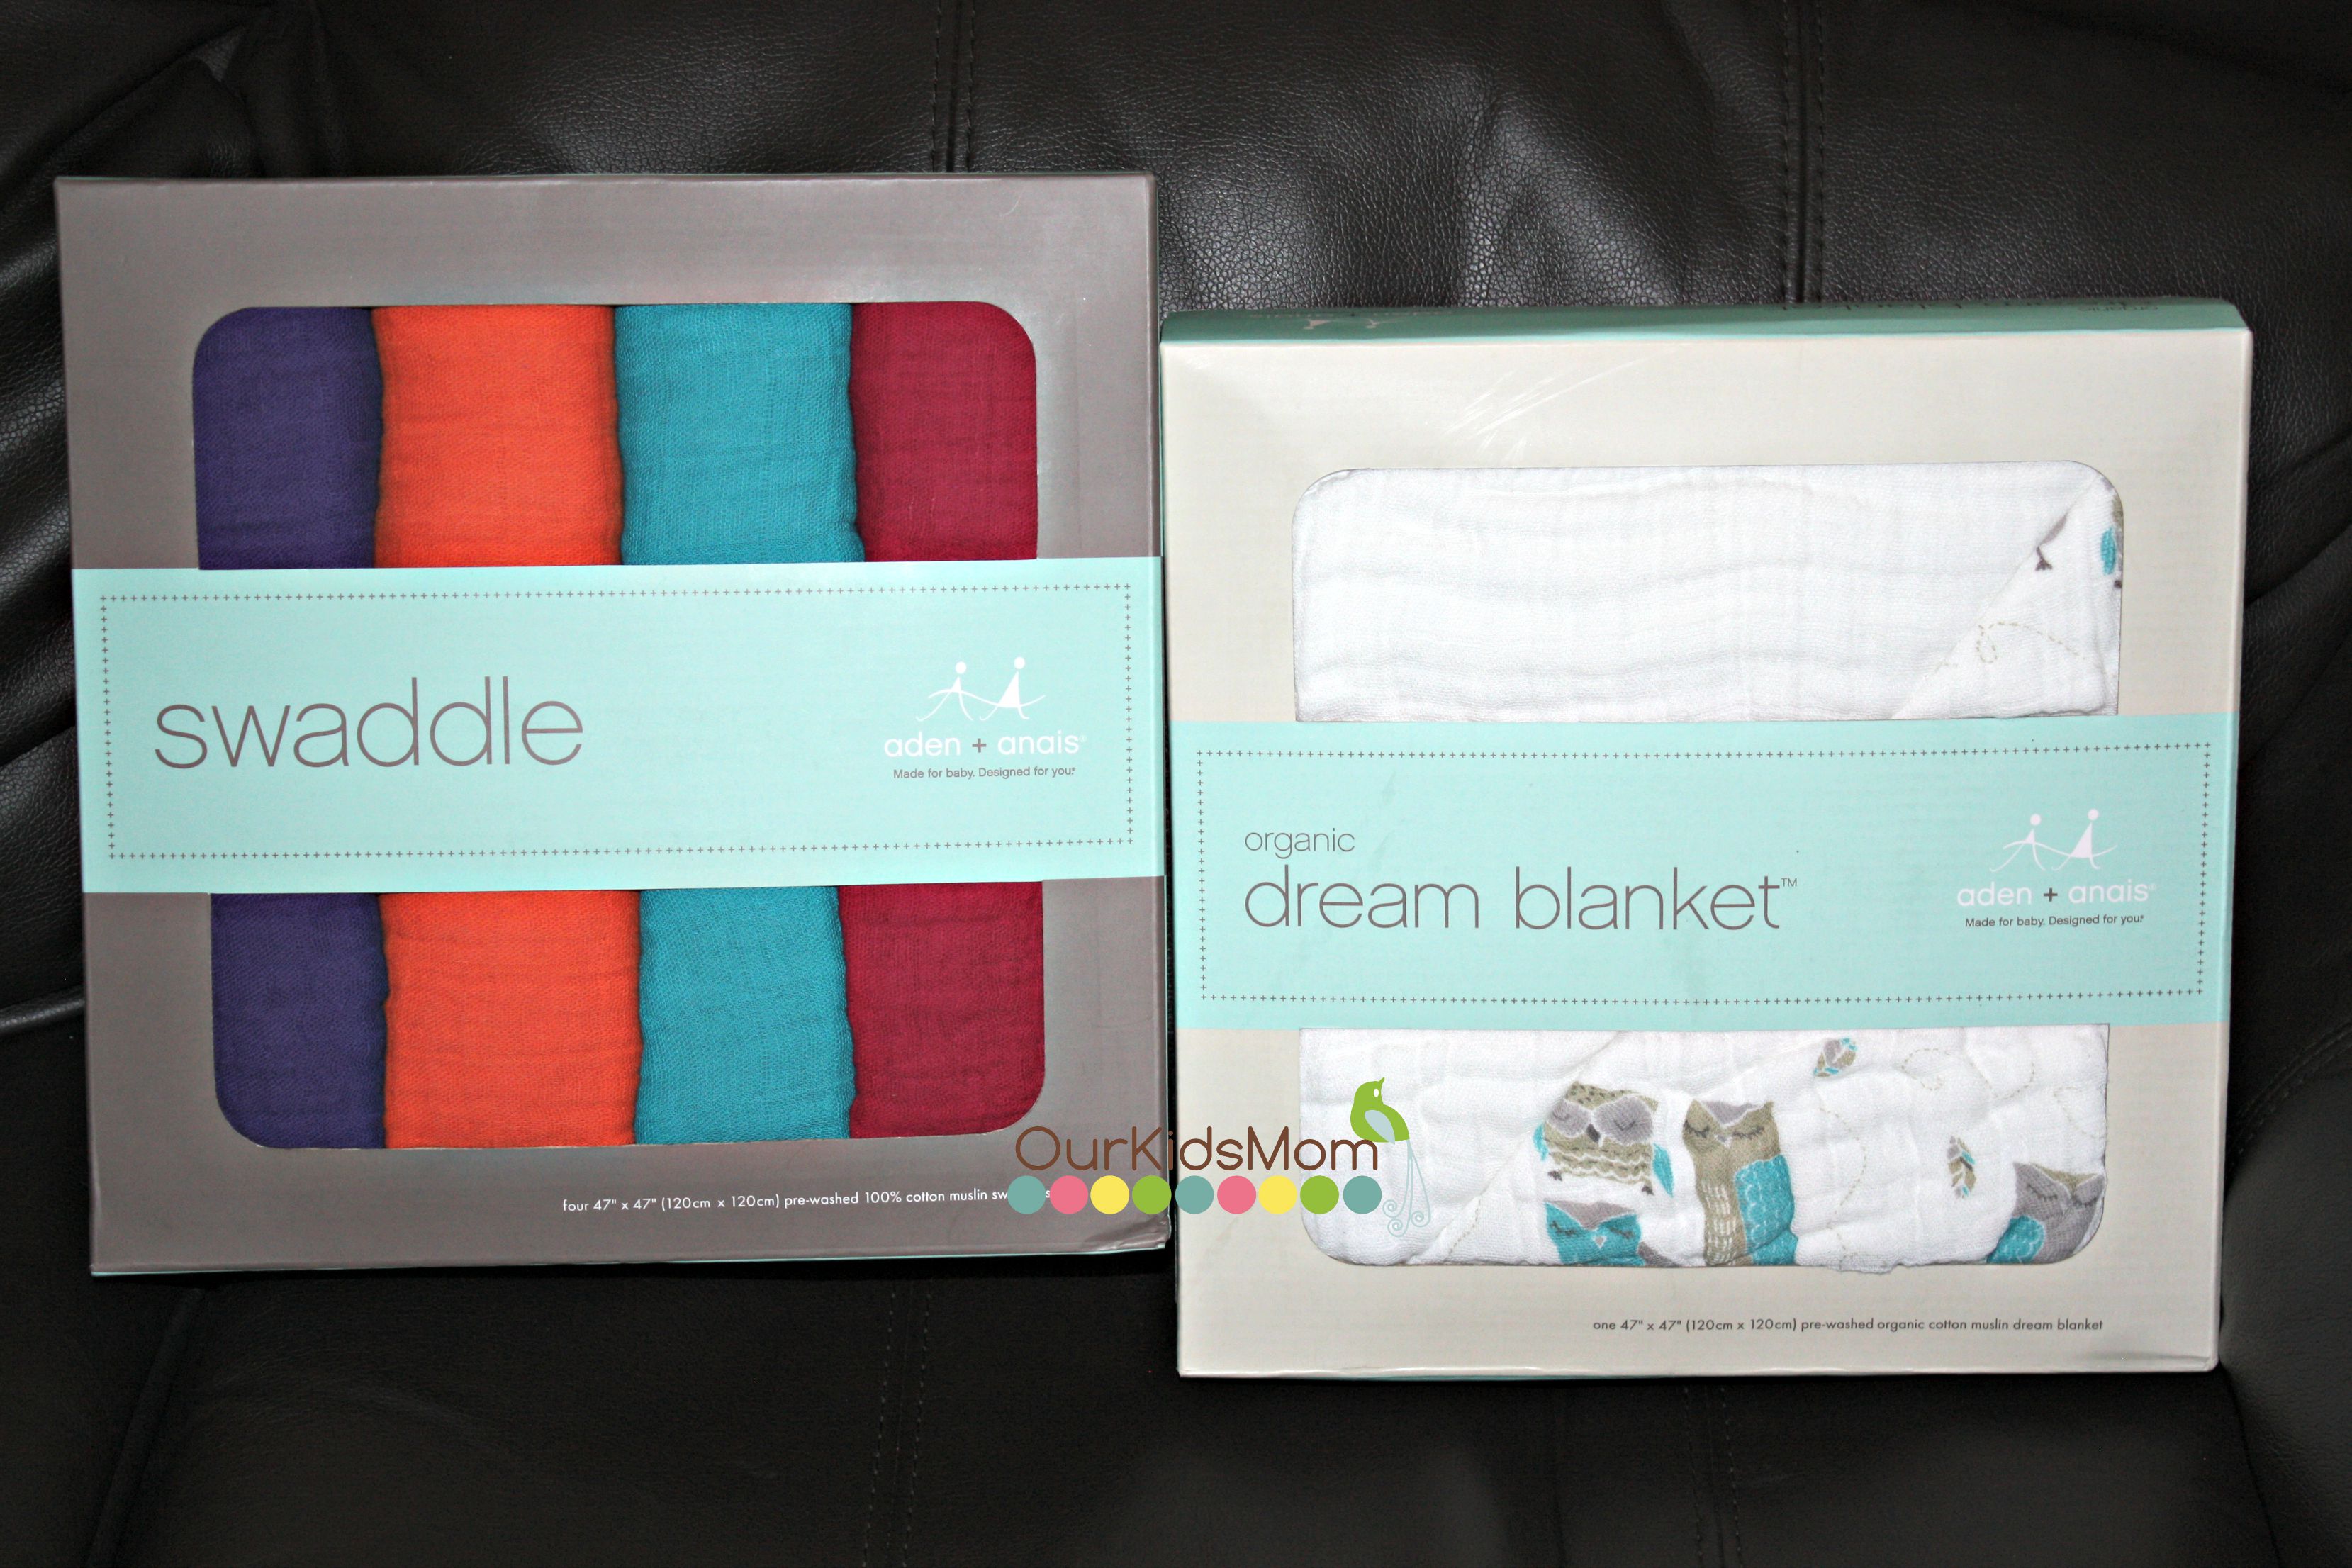 Swaddle Vlankets and Dream Blanket